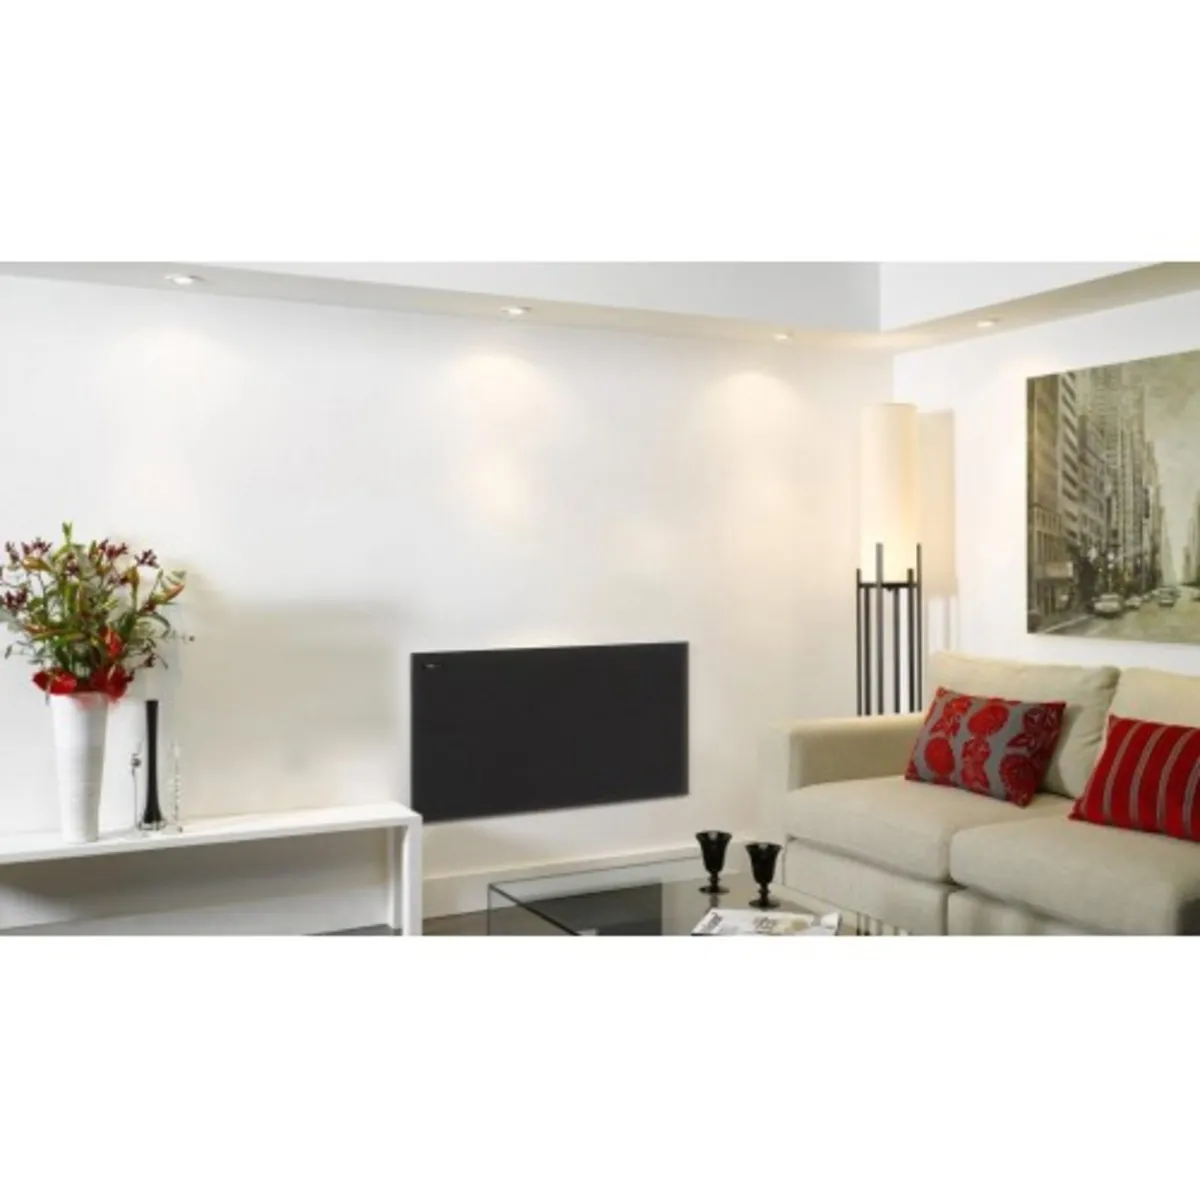 TCM-RA 1000 STONE EFFECT INFRA RED HEATING PANELS